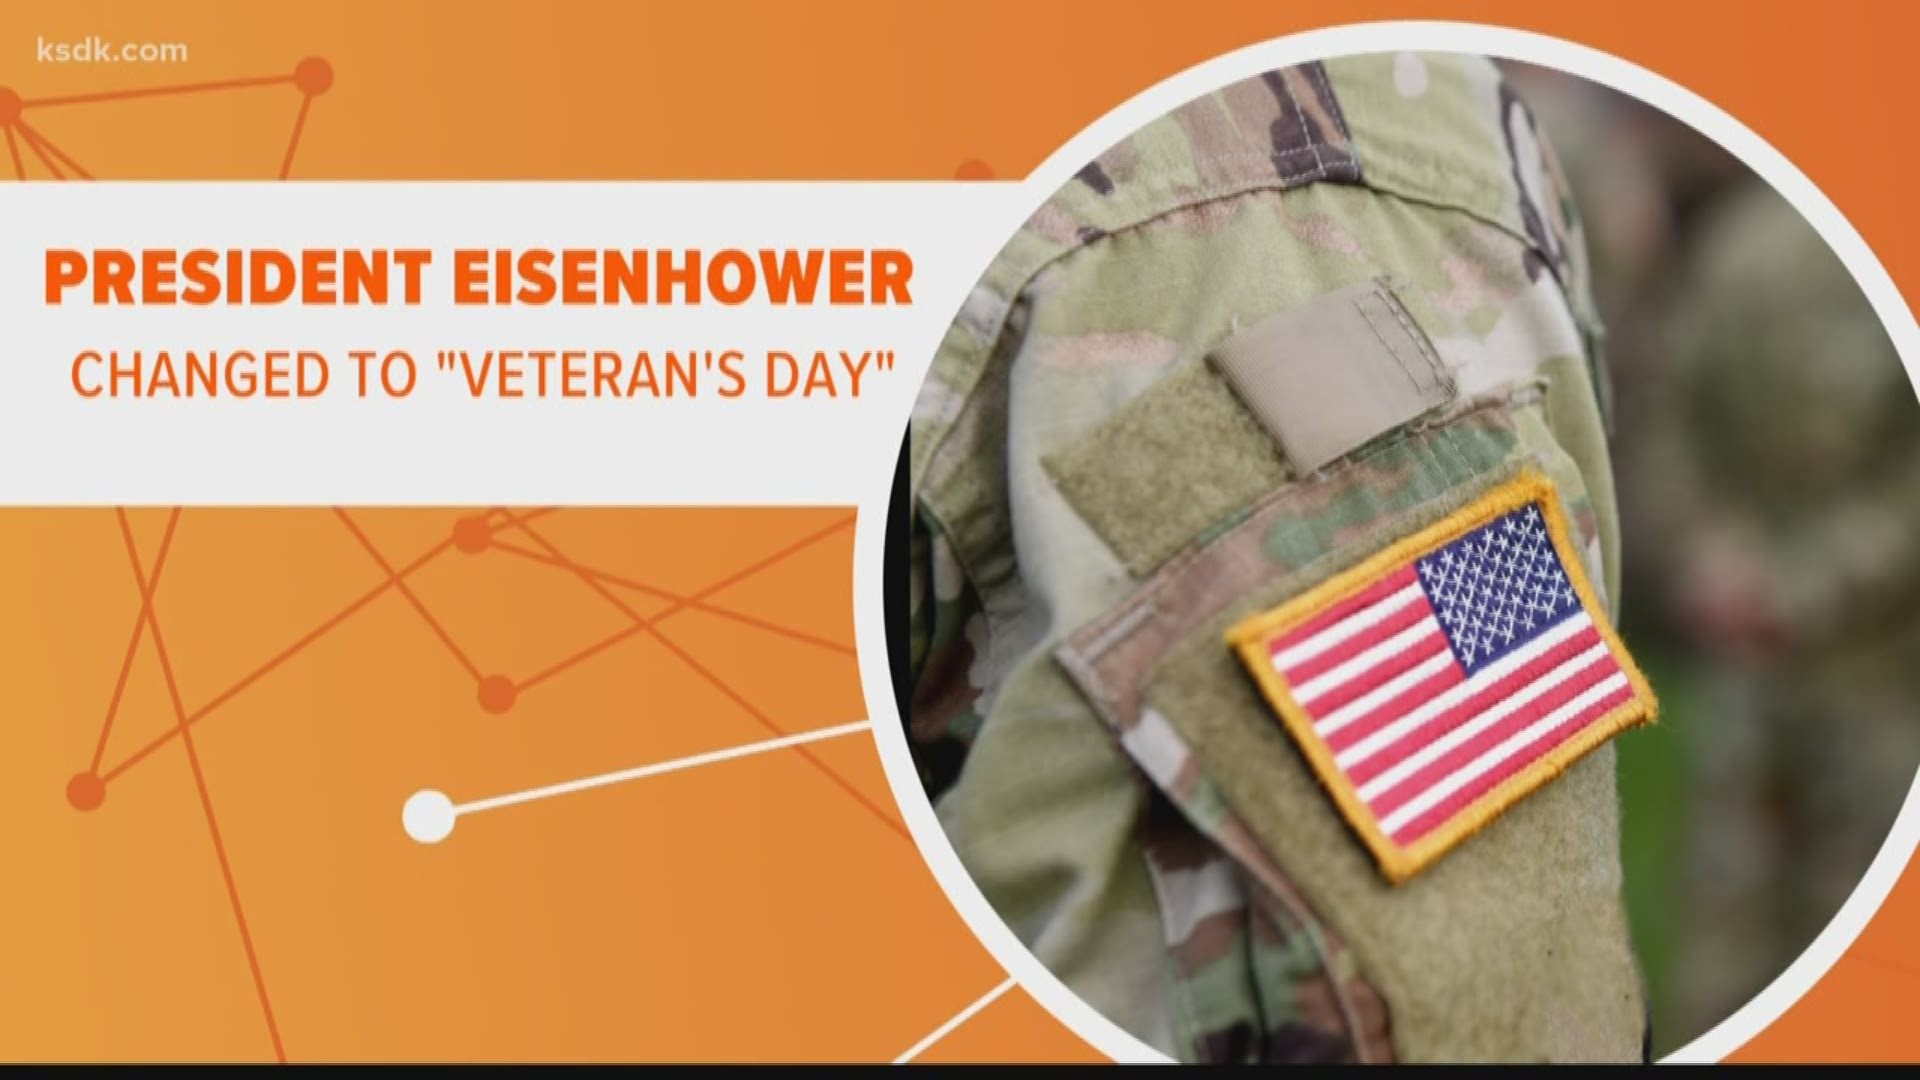 On this Veterans Day, we want to take a moment to honor our veterans and explain how this day because a holiday.